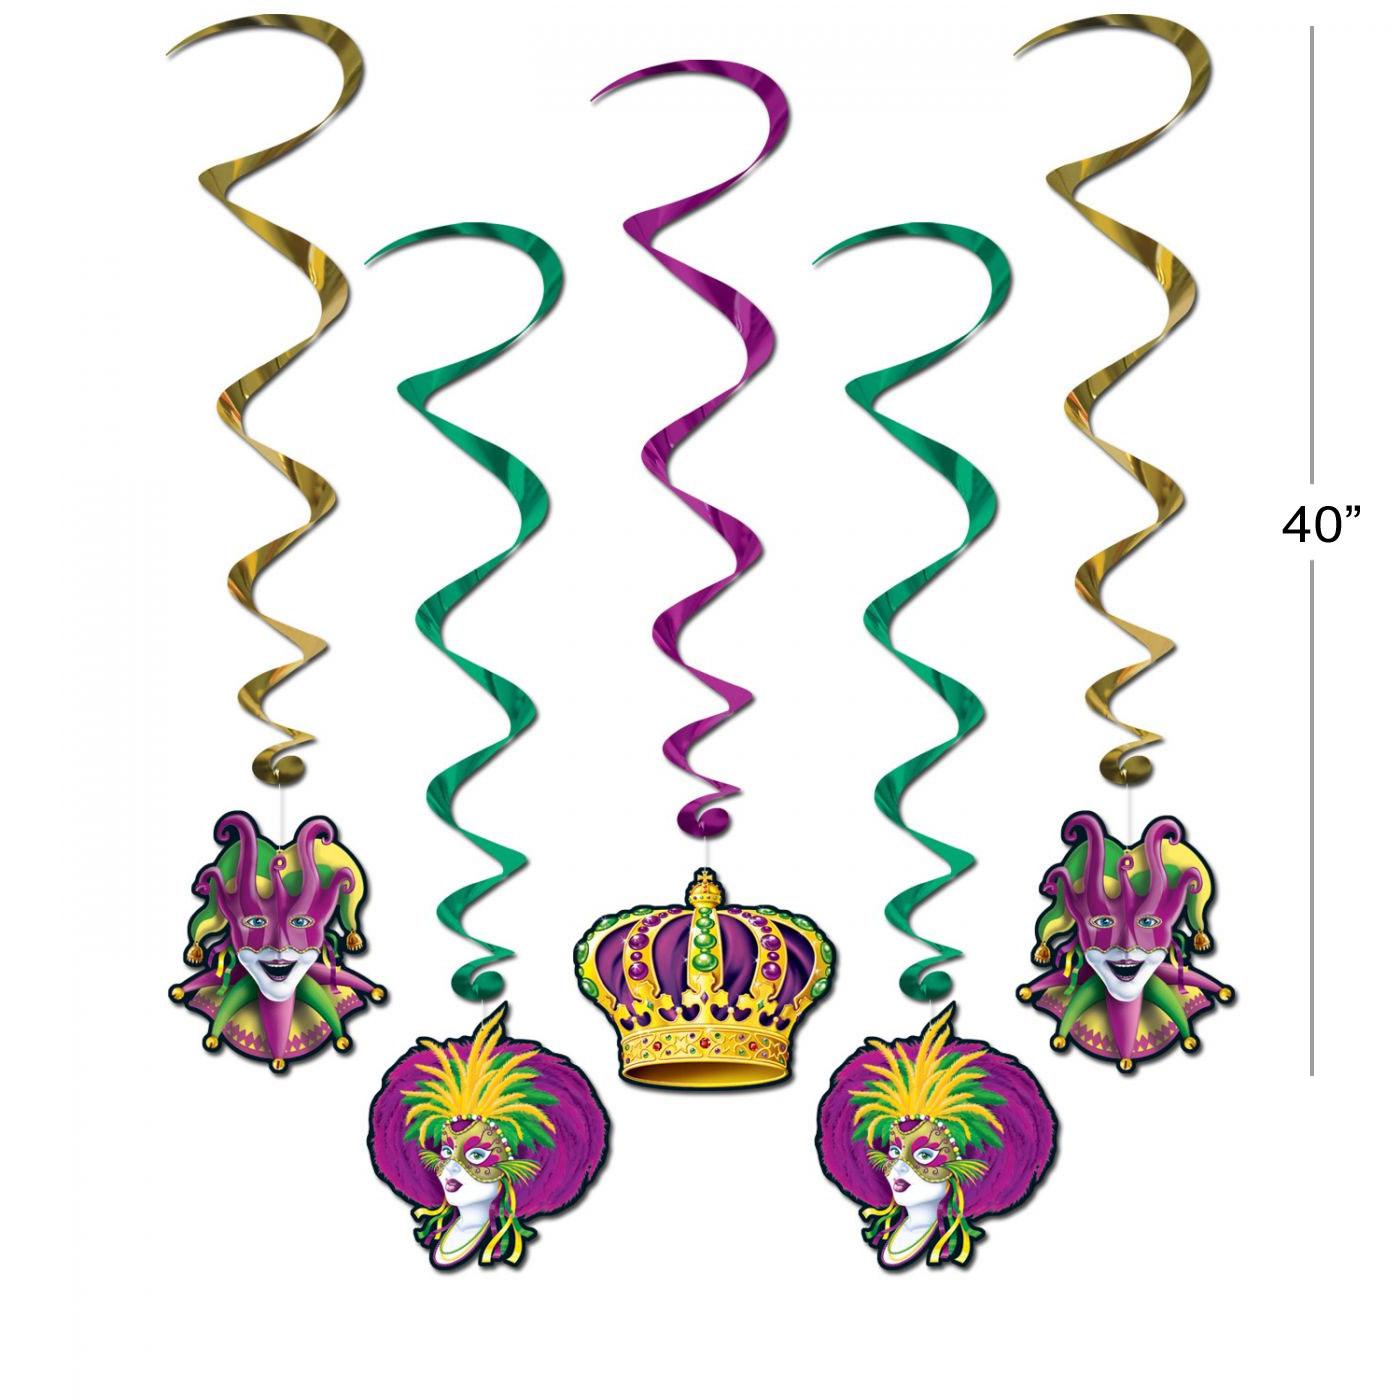 Mardi Gras Whirling Decorations pack (5pce) by Beistle 57556 available in the UK here at Karnival Costumes online party shop